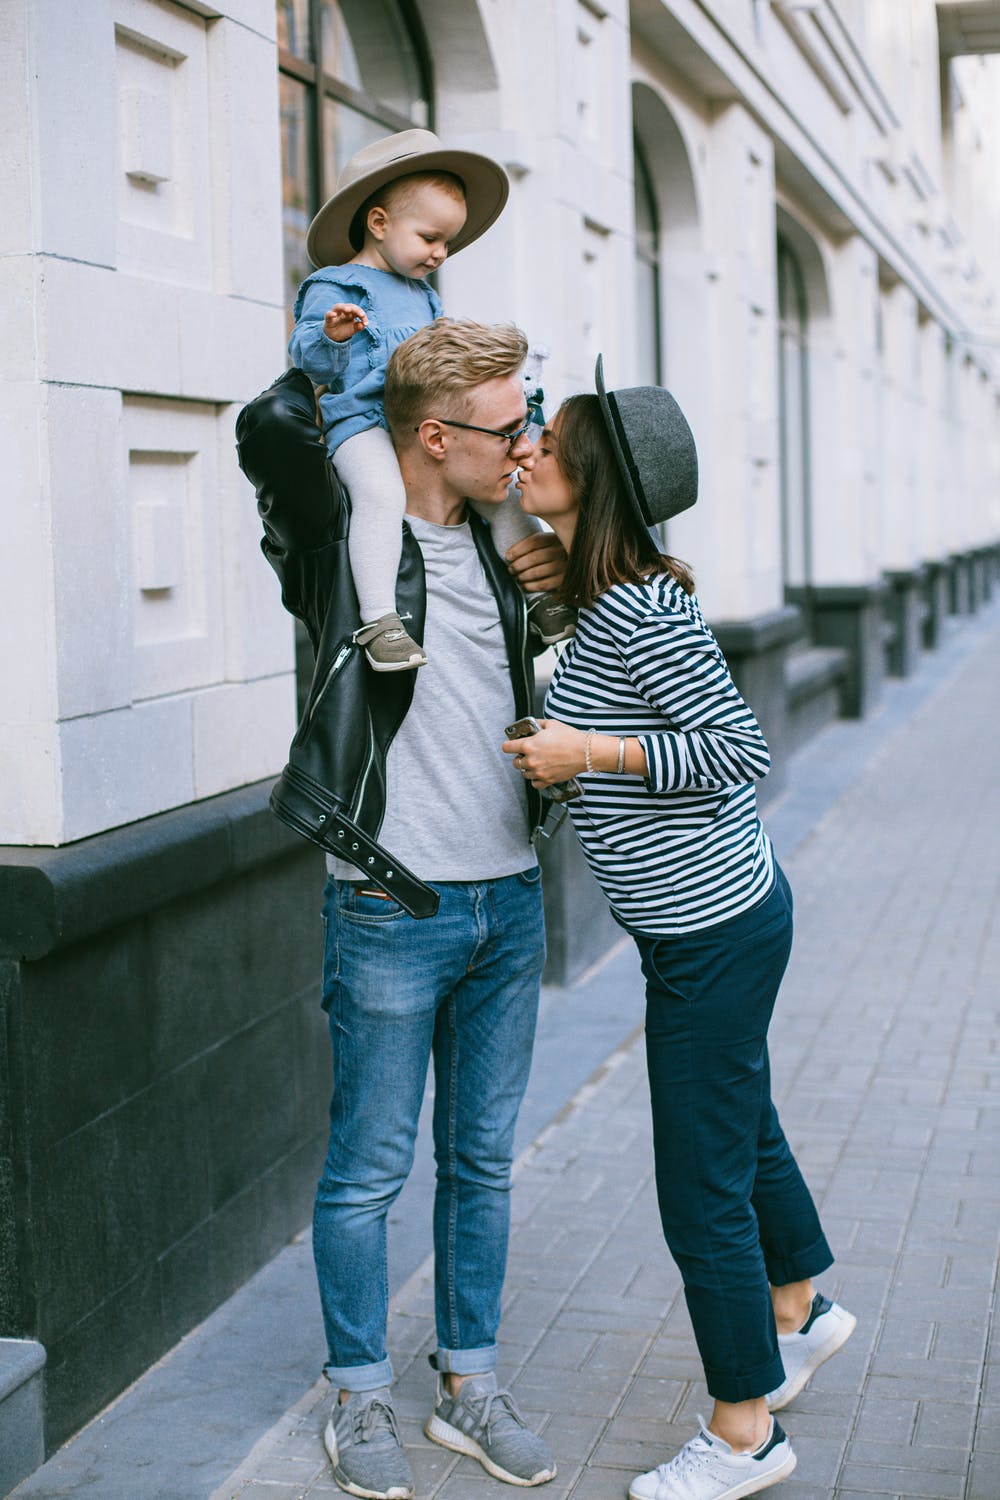 The couple lived happily ever after with their son | Source: Unsplash